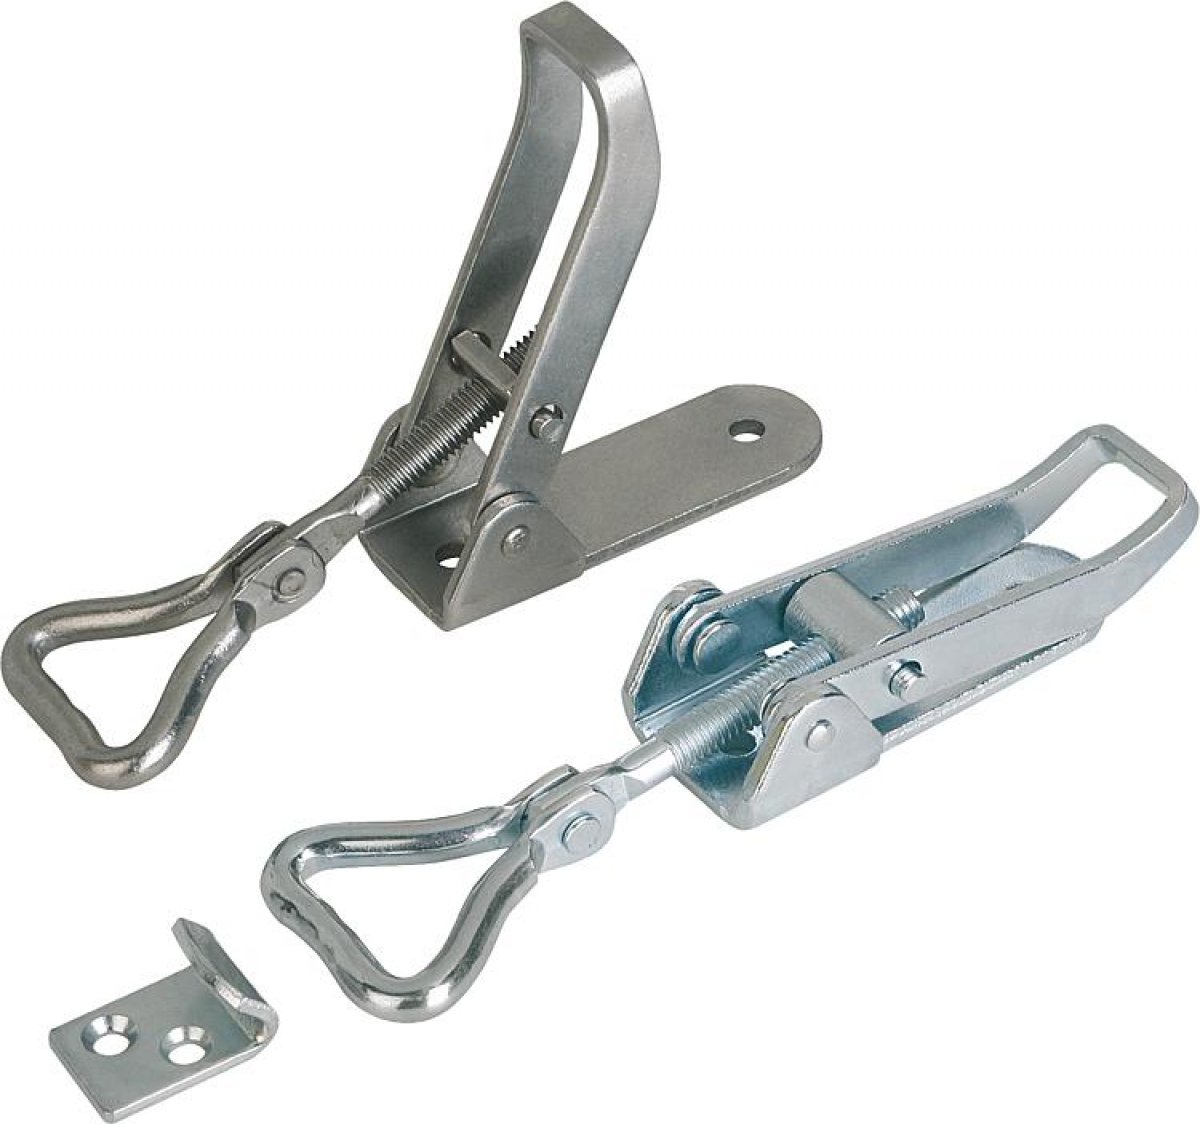 Latches adjustable with swing bail